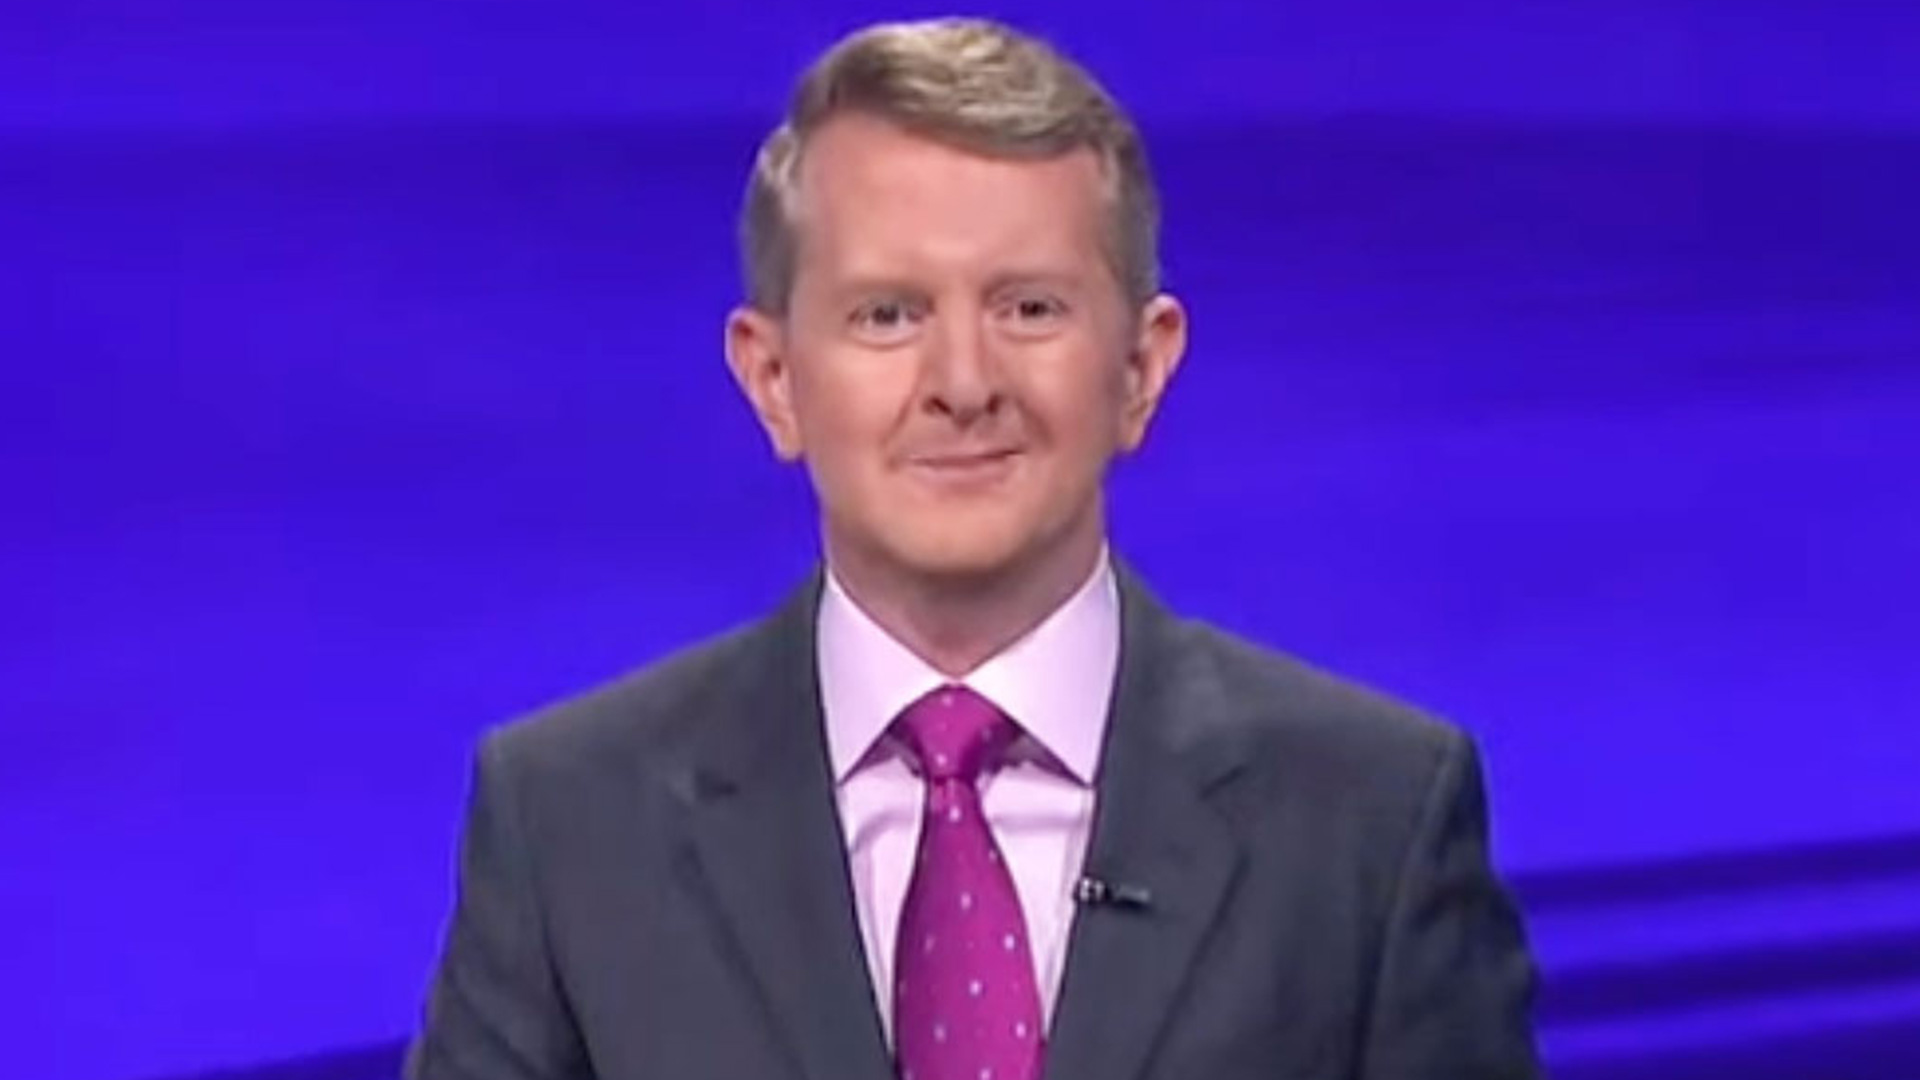 Jeopardy! Fans are confused by Ken Jennings’ claims that he was a TV producer, despite being a host of a game show.